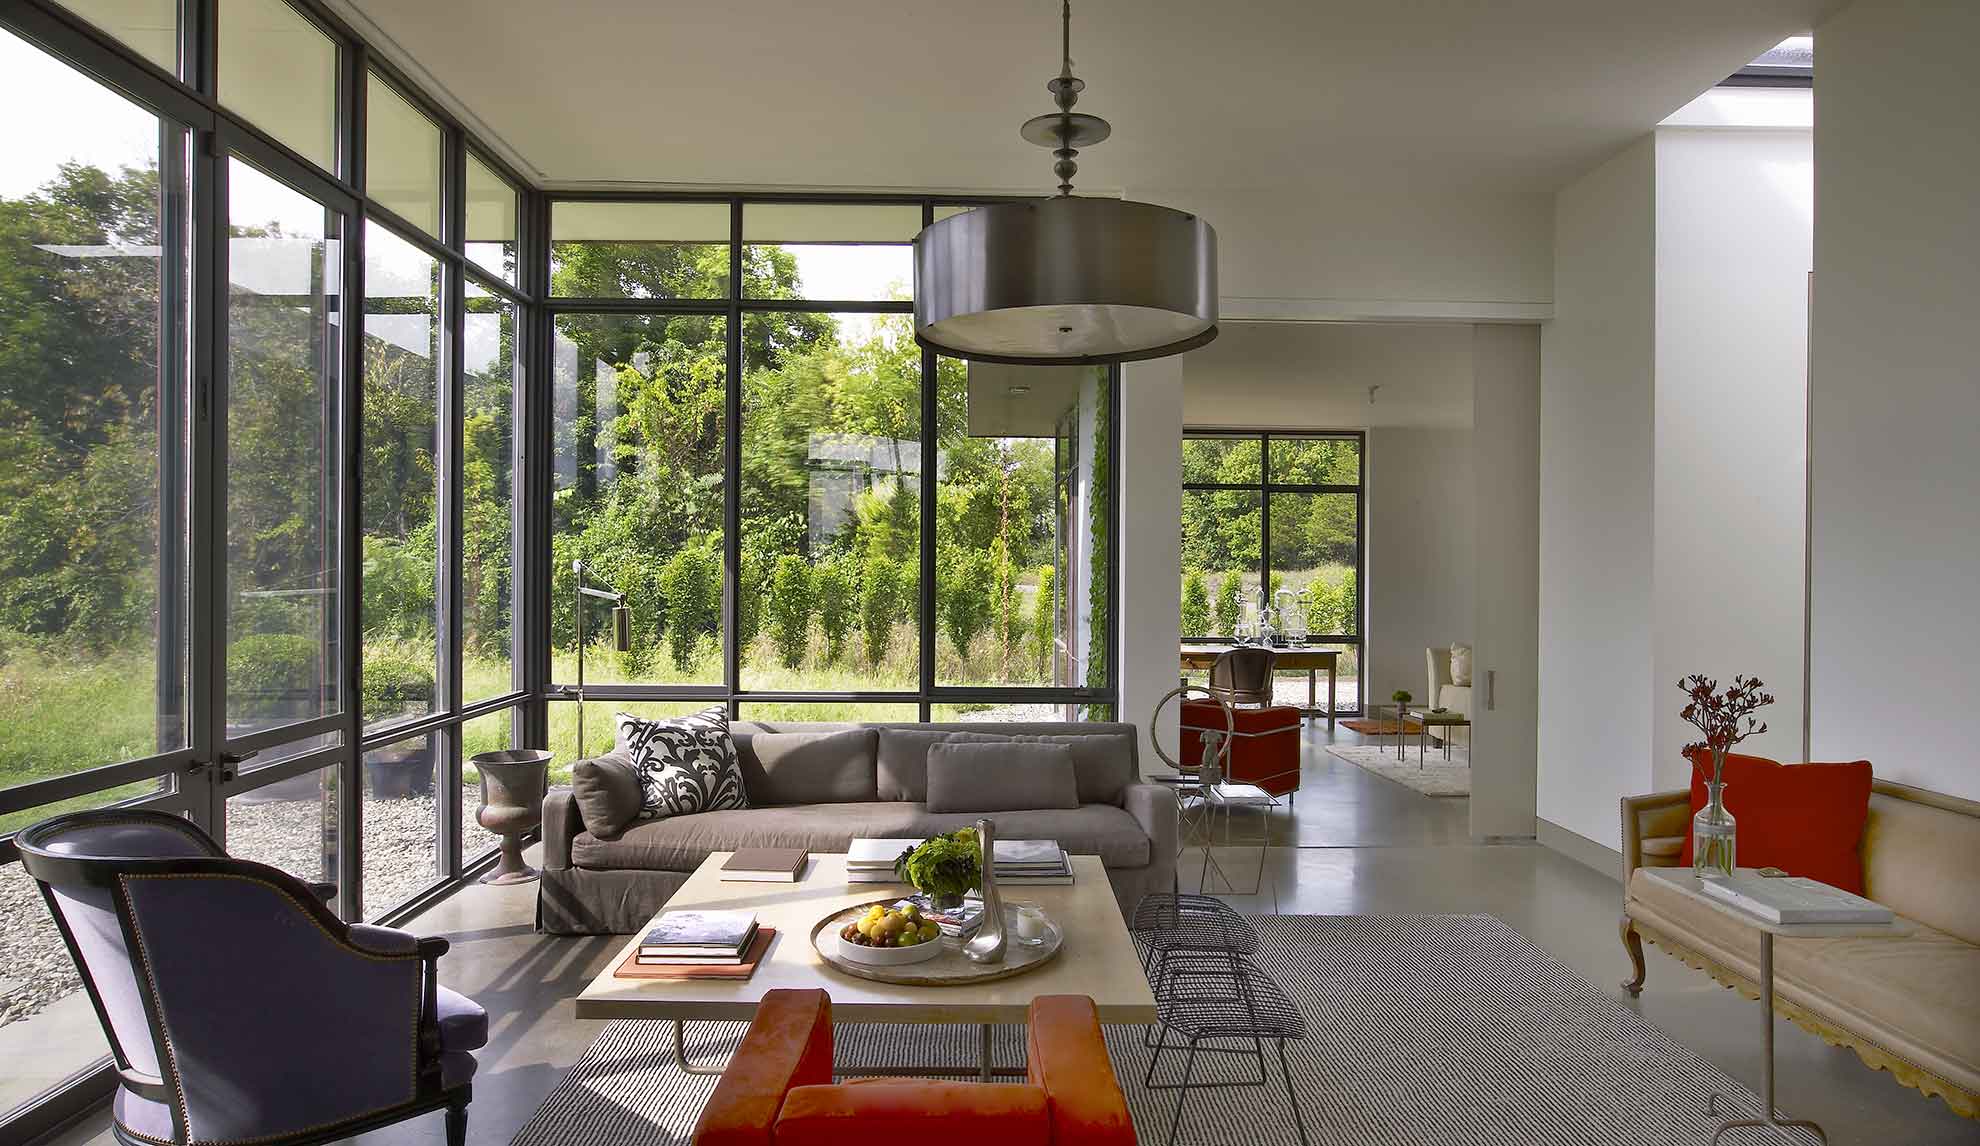 Interior Design by Siskin Valls, contemporary living room featuring siskin dining table